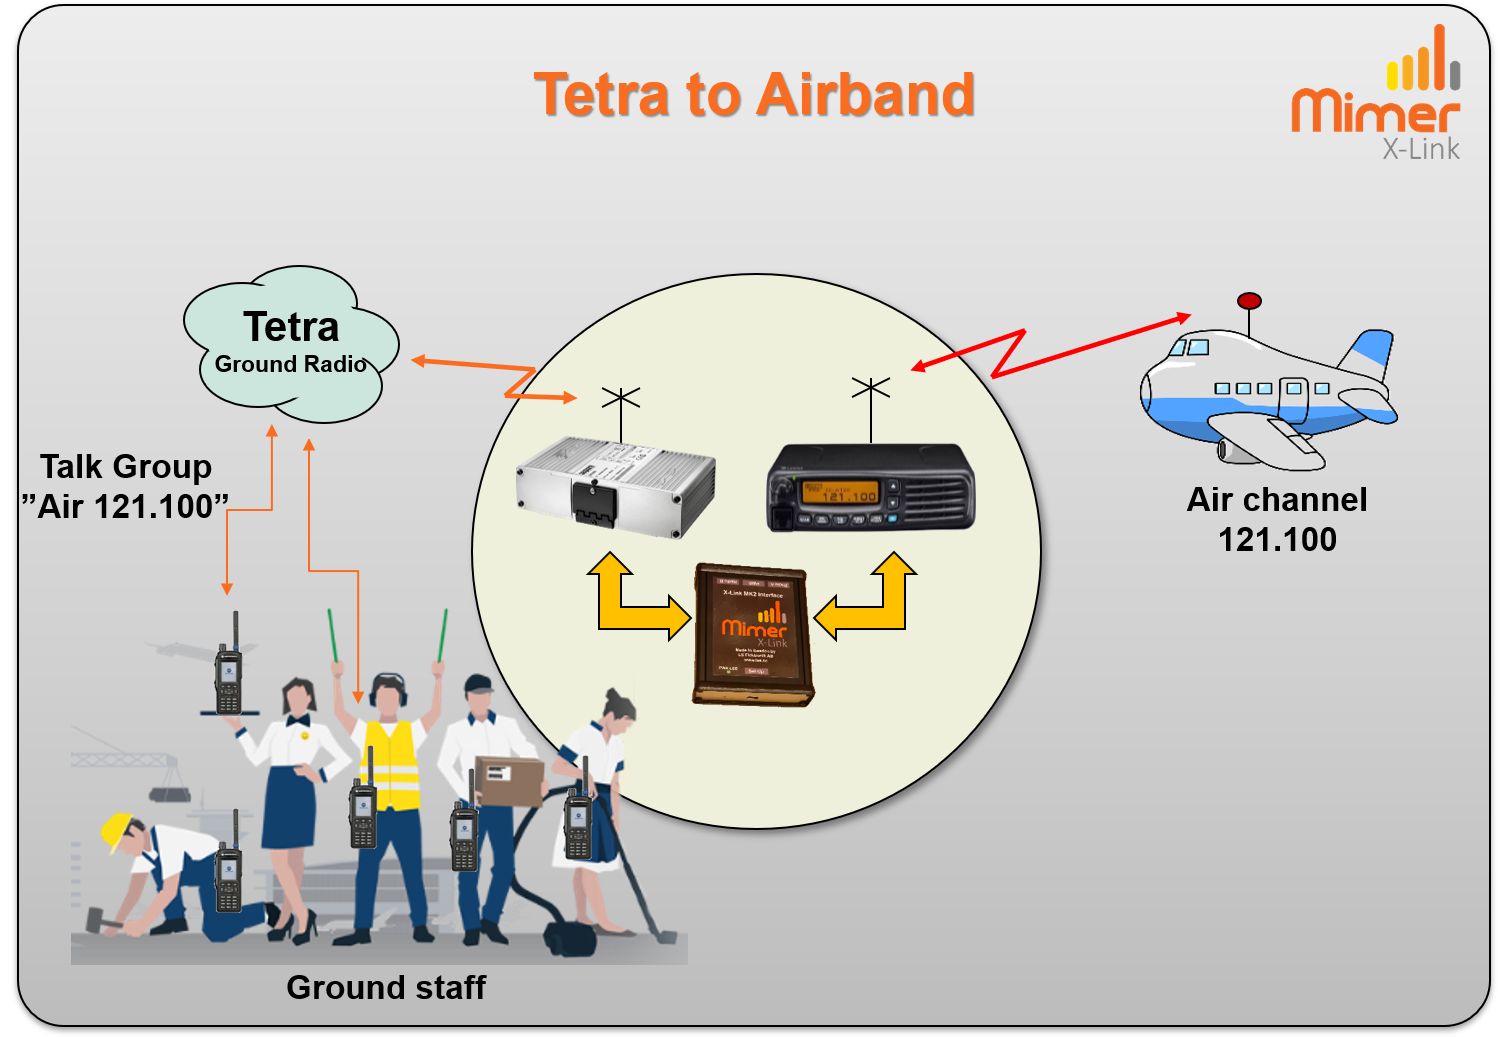 X-Link Tetra to Airband